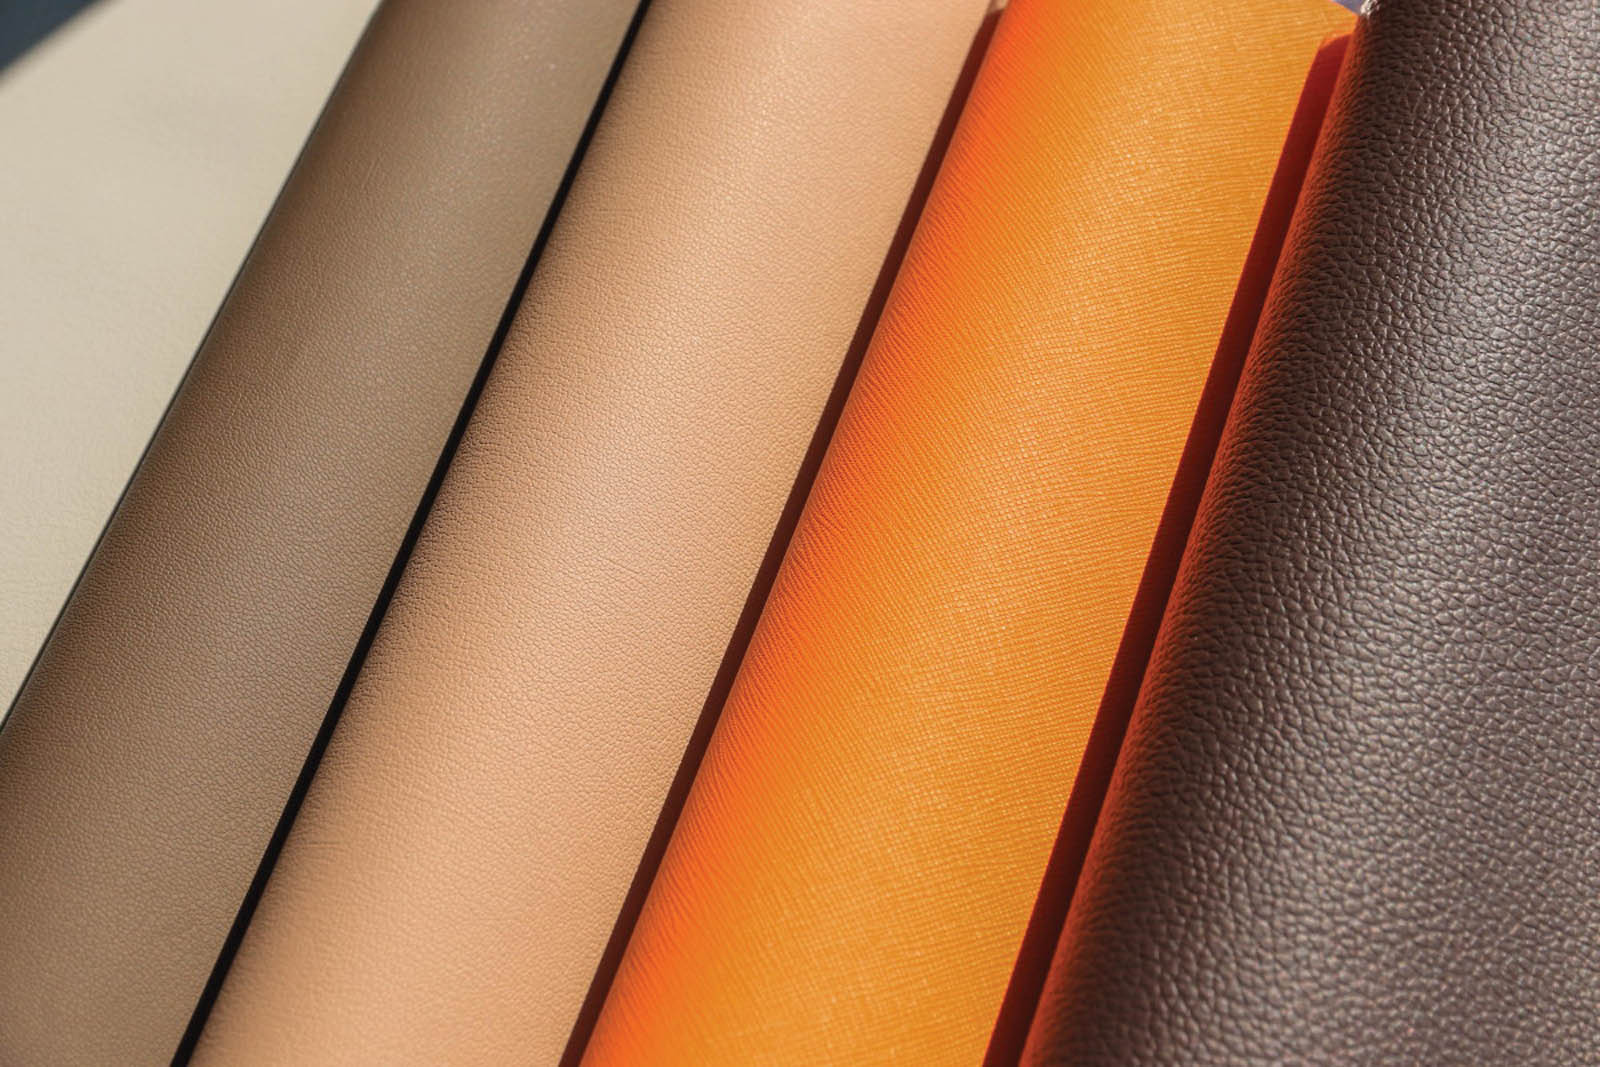 What is Vegan Leather made of? What is inside Vegan Leather?